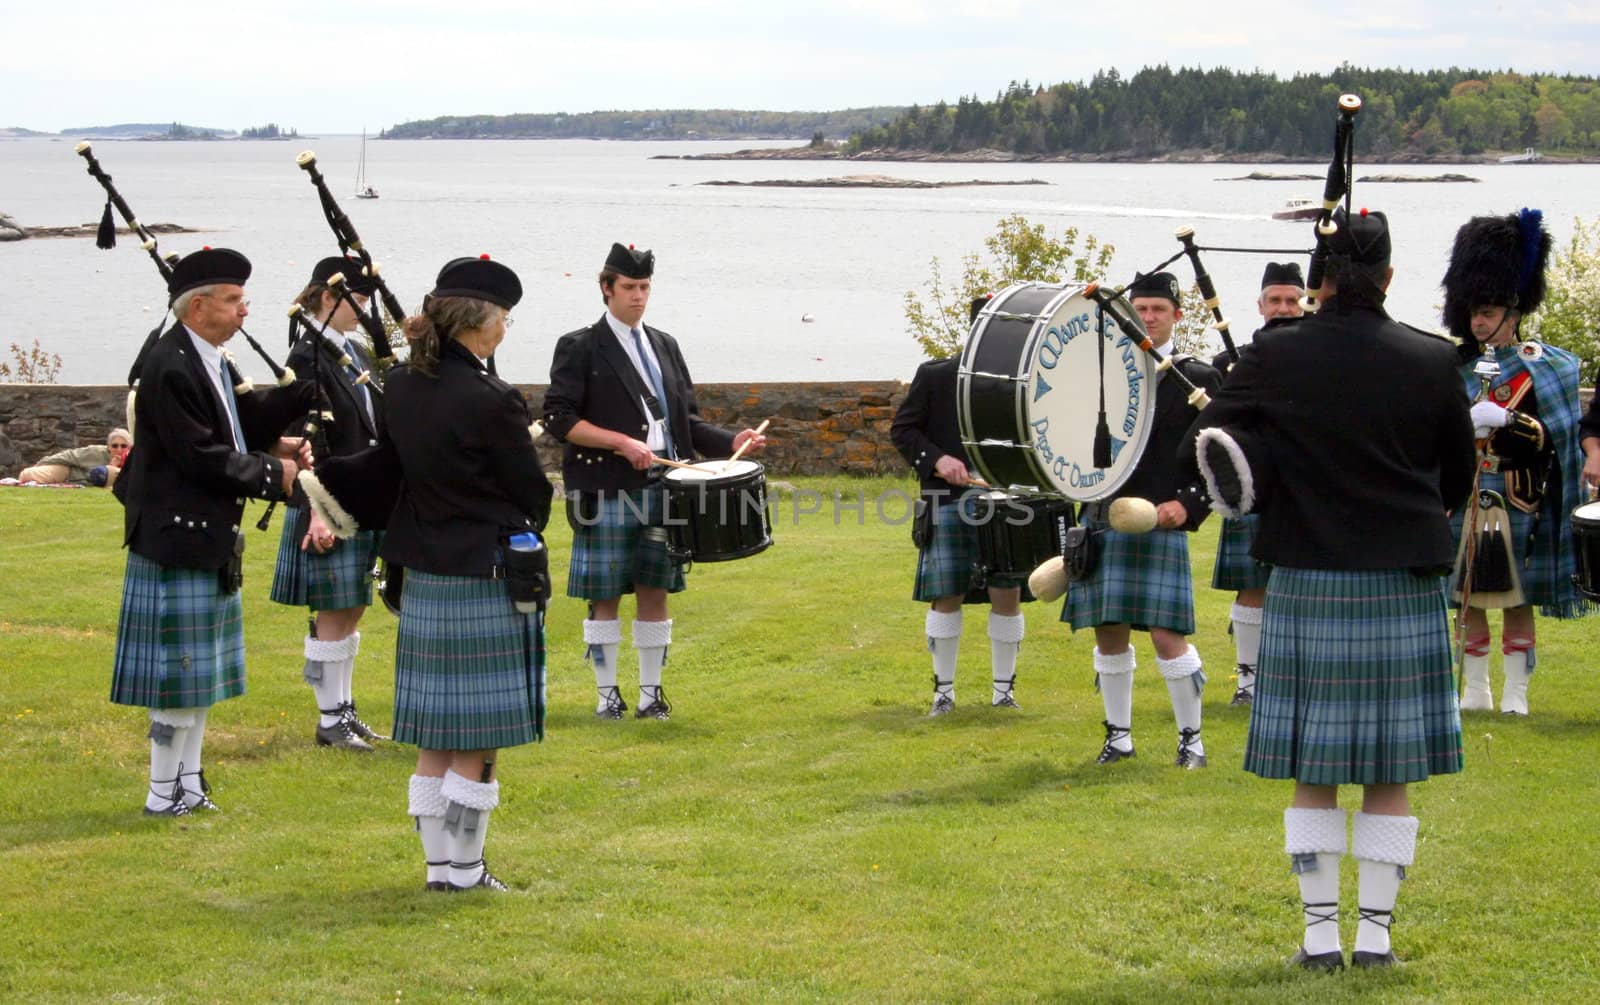 Along the coastline, the Maine St. Andrews Pipes and Drums bagpipers perform an exhibittion